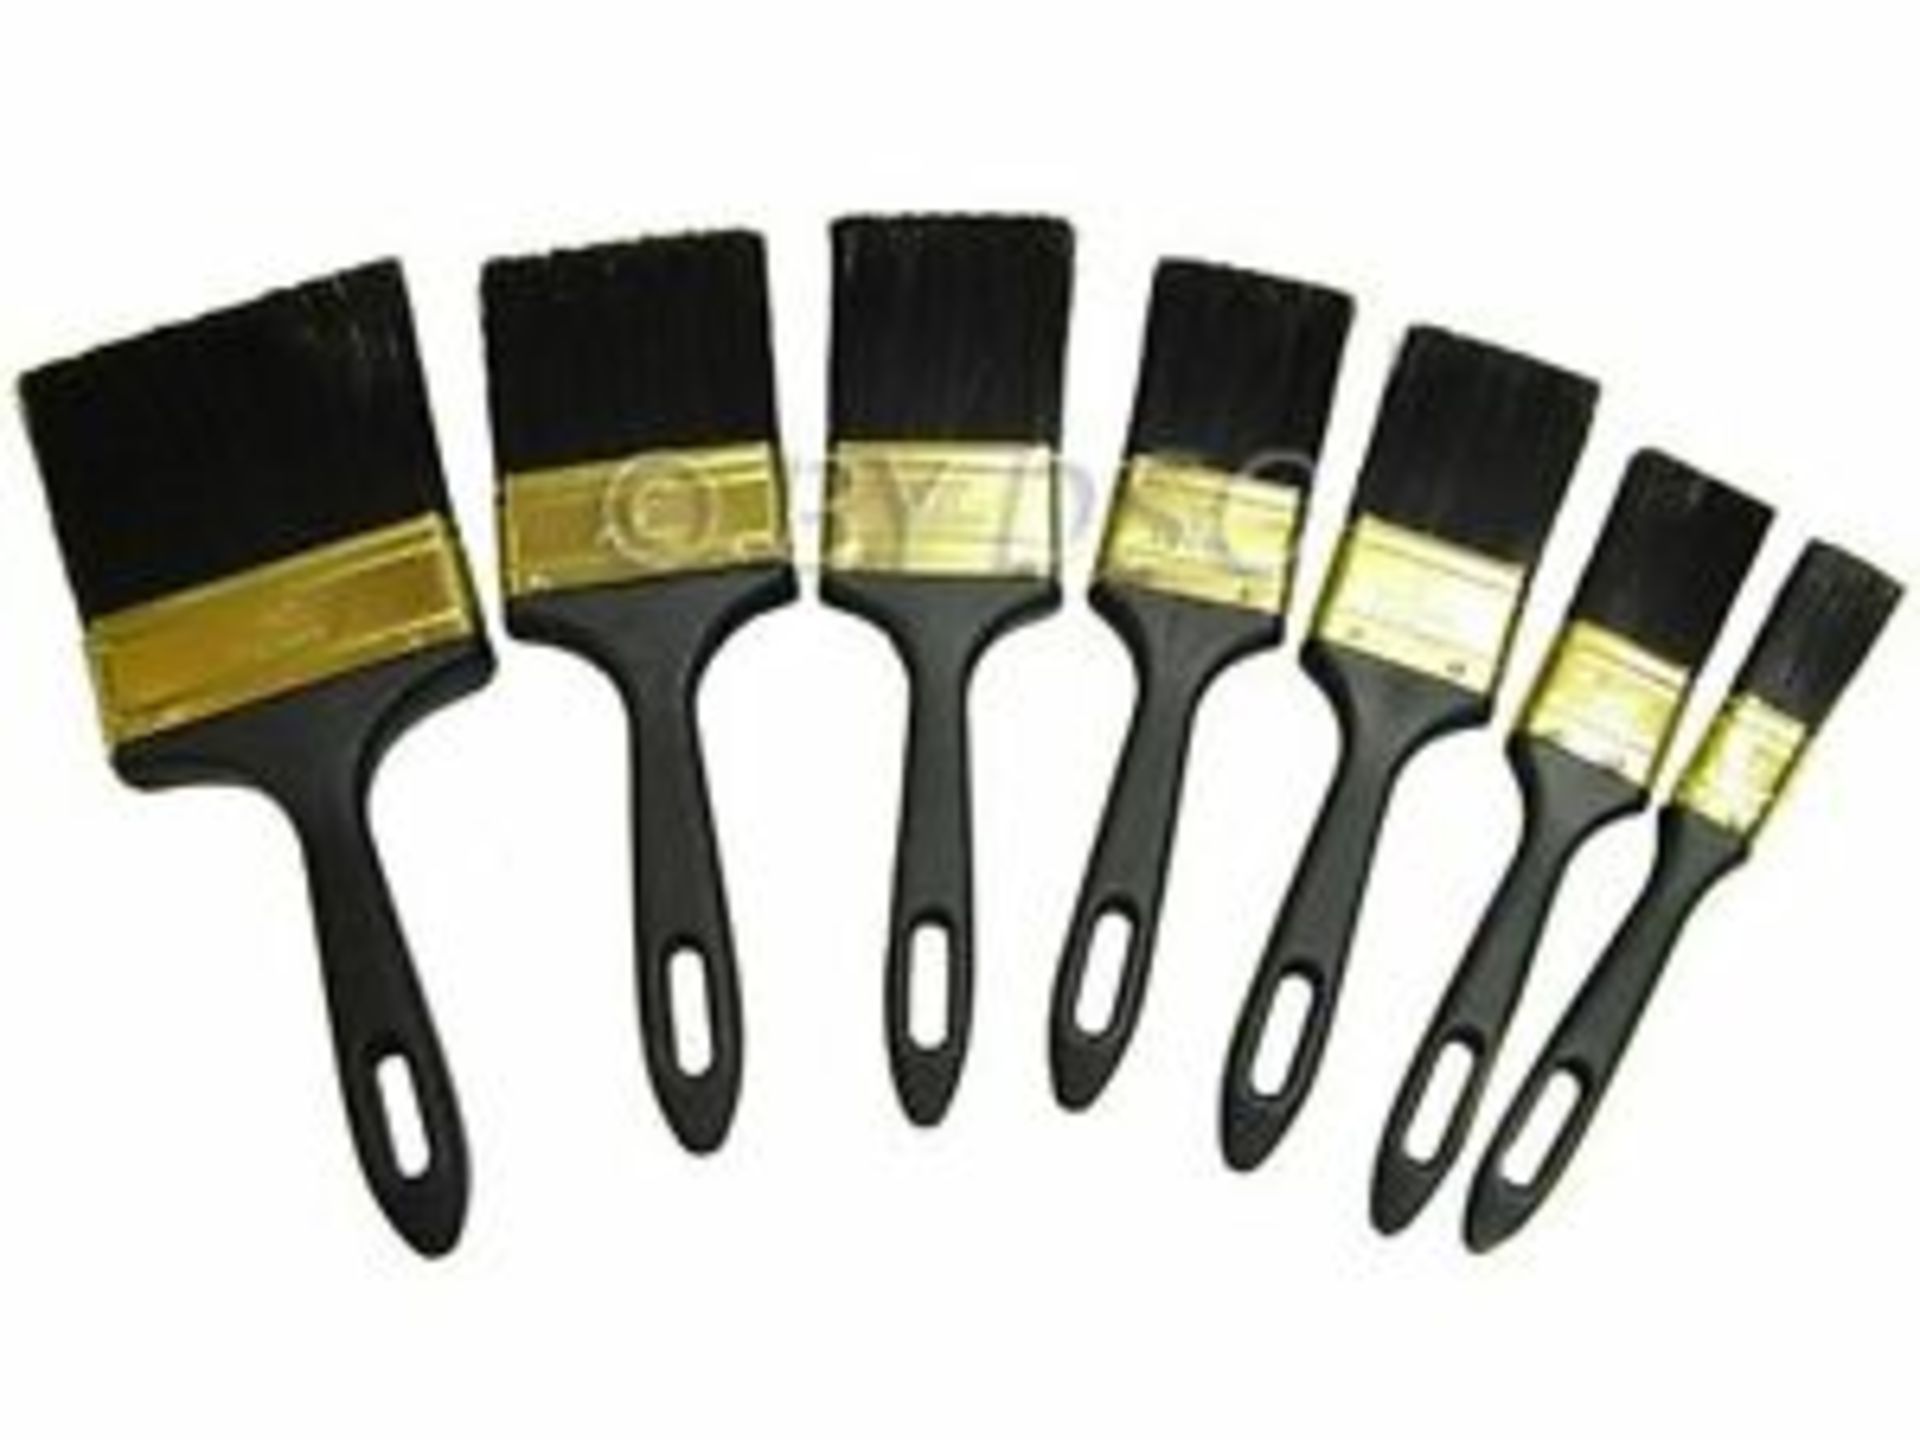 + VAT Brand New 7 Piece Utility Paint Brush Set - Between 4 Inches & 1 Inch